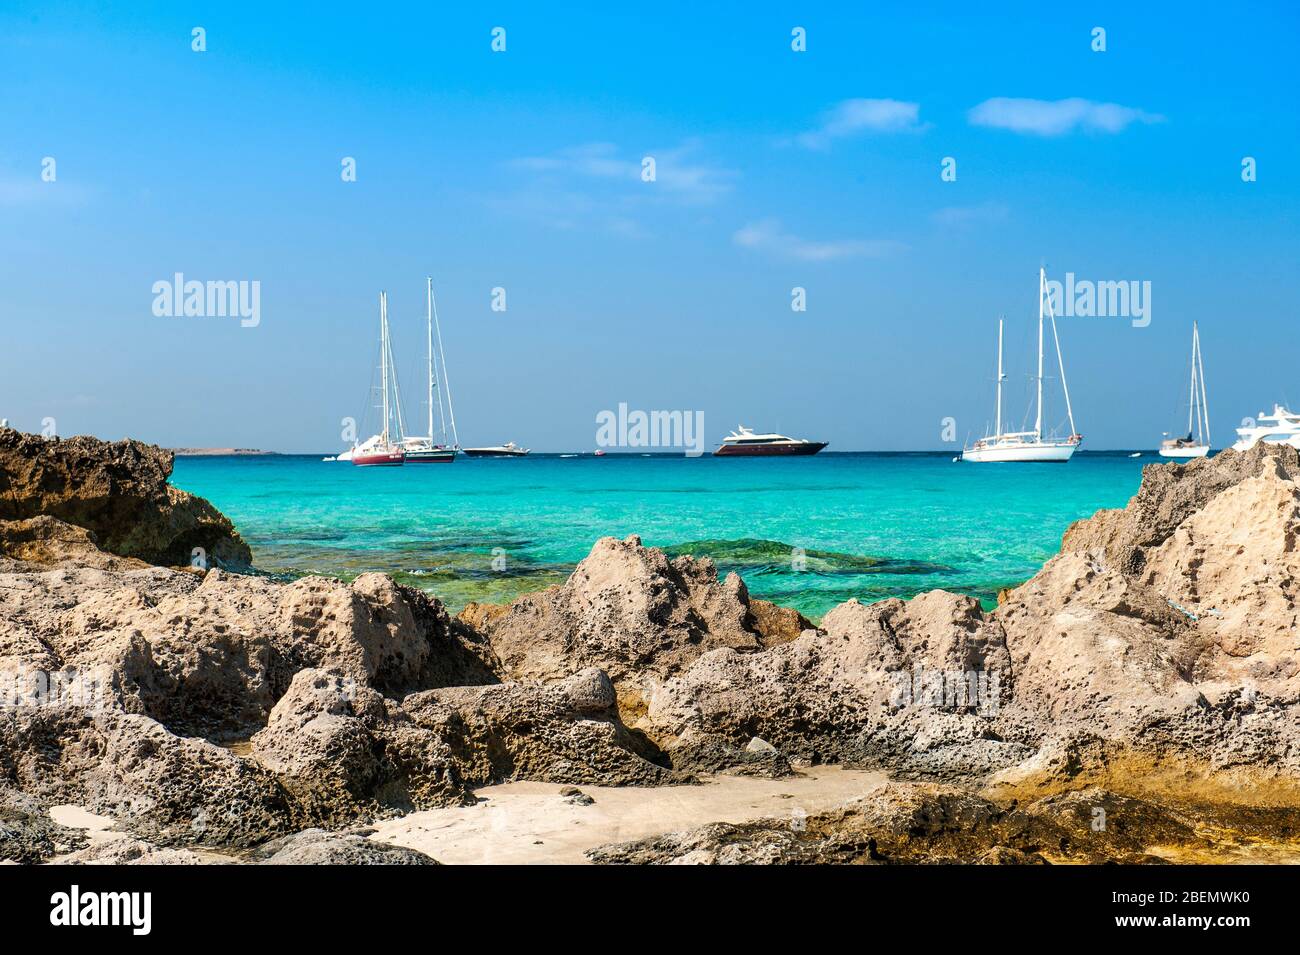 Ses Illetes beach, Formentera, Balearic Islands, Spain. The dreamy quiet of Ses Illetes beach with the dreamy sea with blue shades and sailing boats. Stock Photo